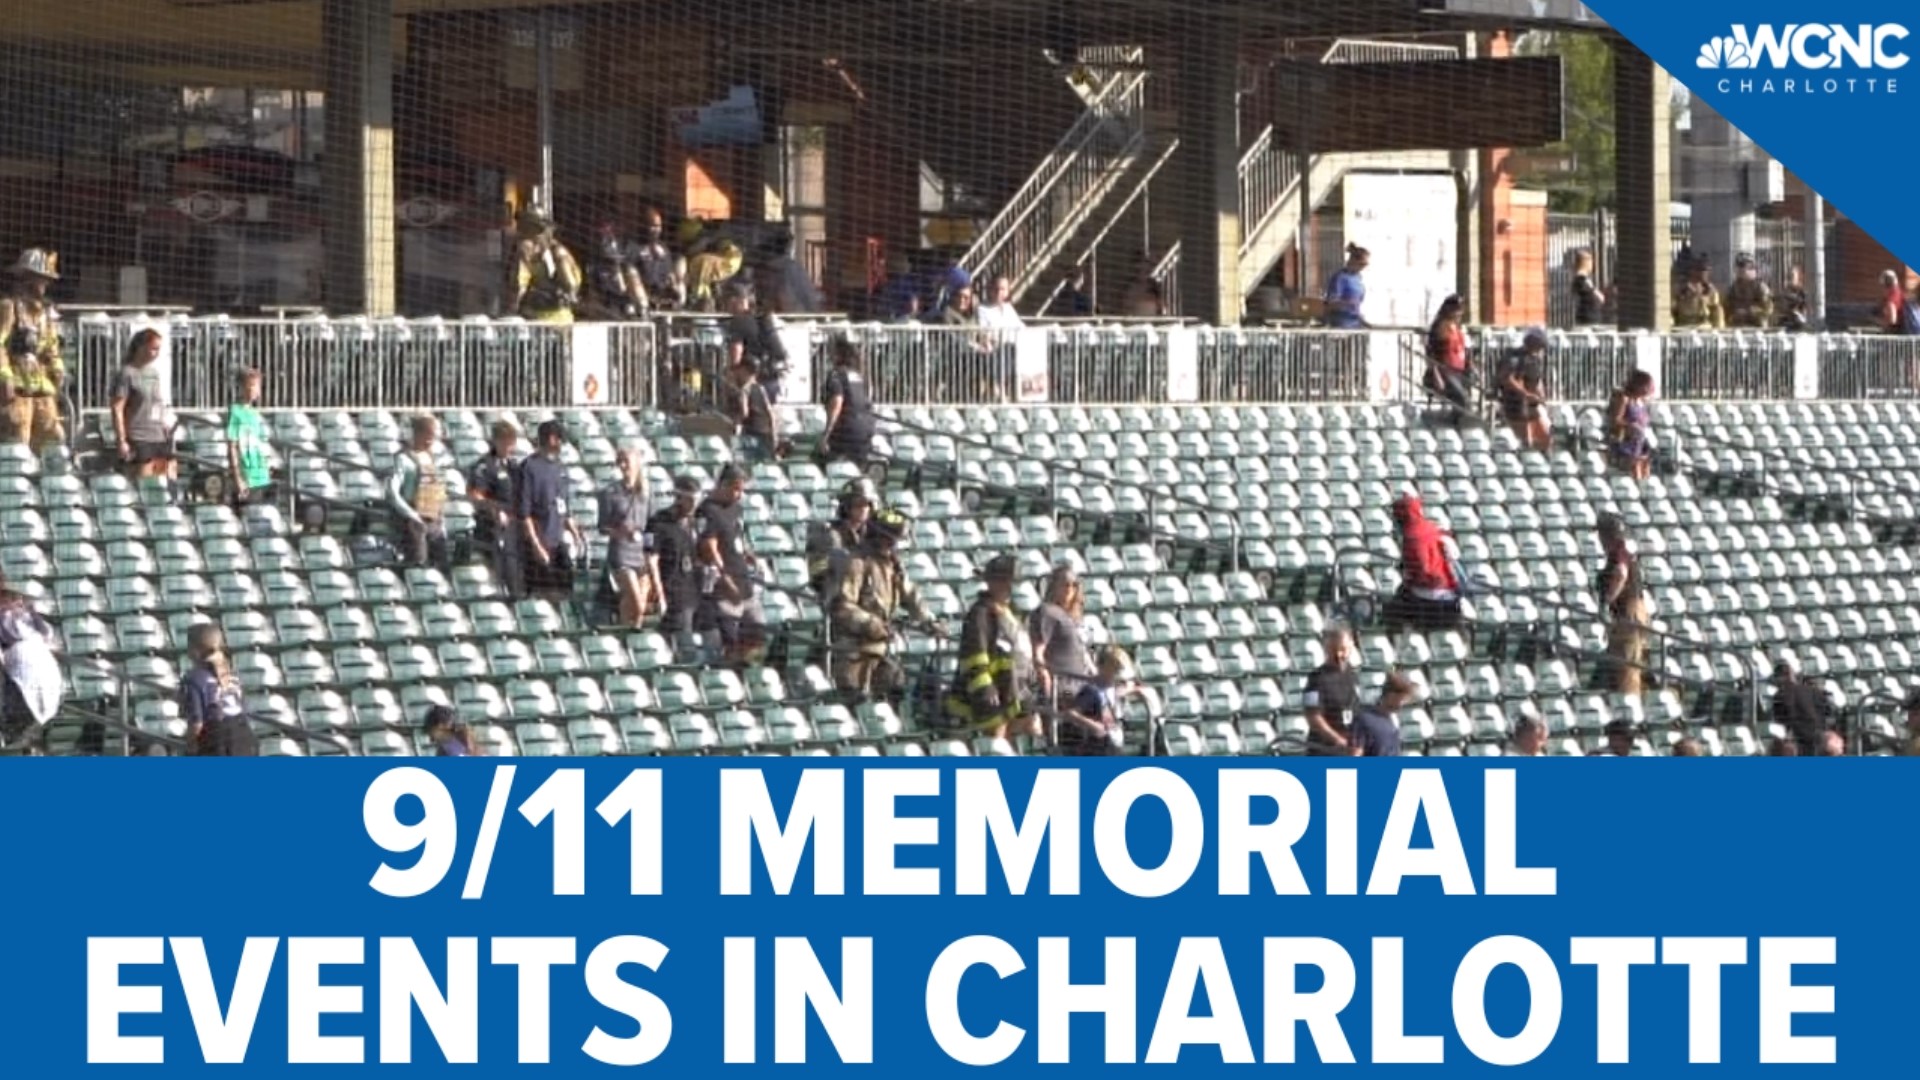 As we remember the Sept. 11 attacks 21 years later, Charlotte-area organizations will host events this weekend to honor the victims.